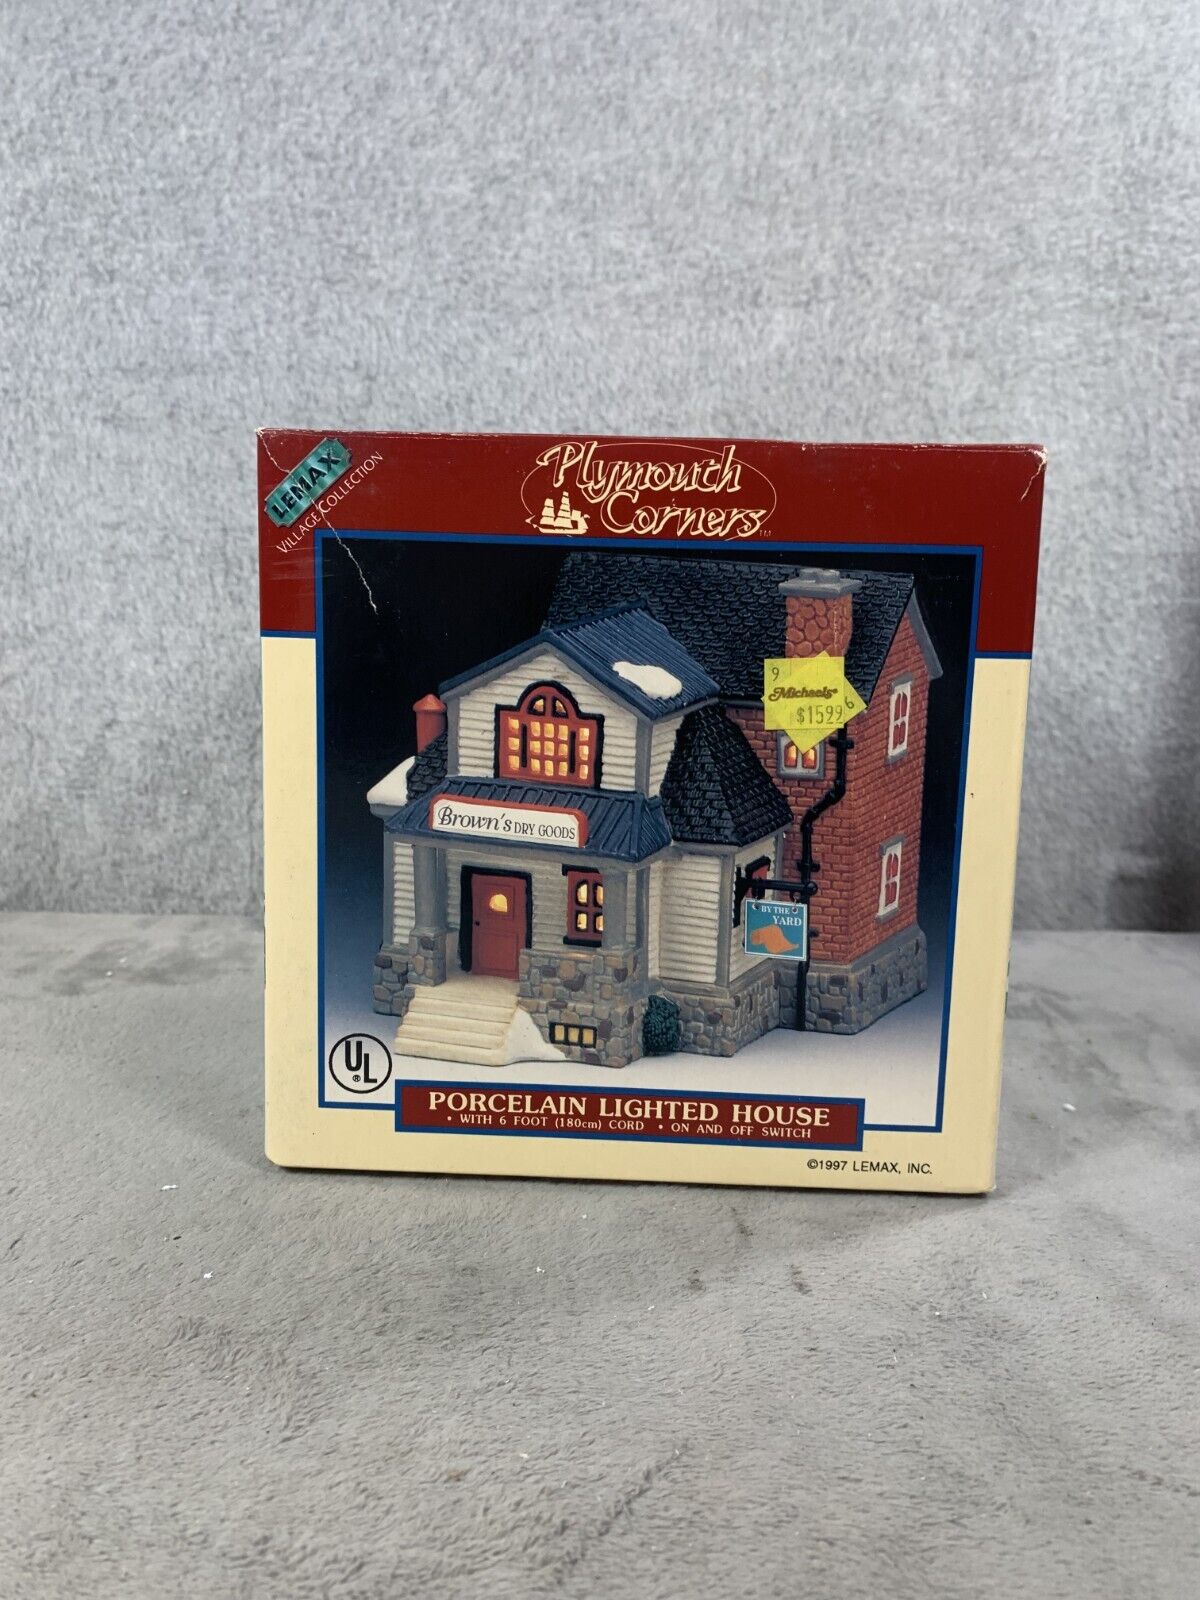 Lemax Village Collection 1997 Plymouth Corners  BROWN'S DRY GOODS in the box